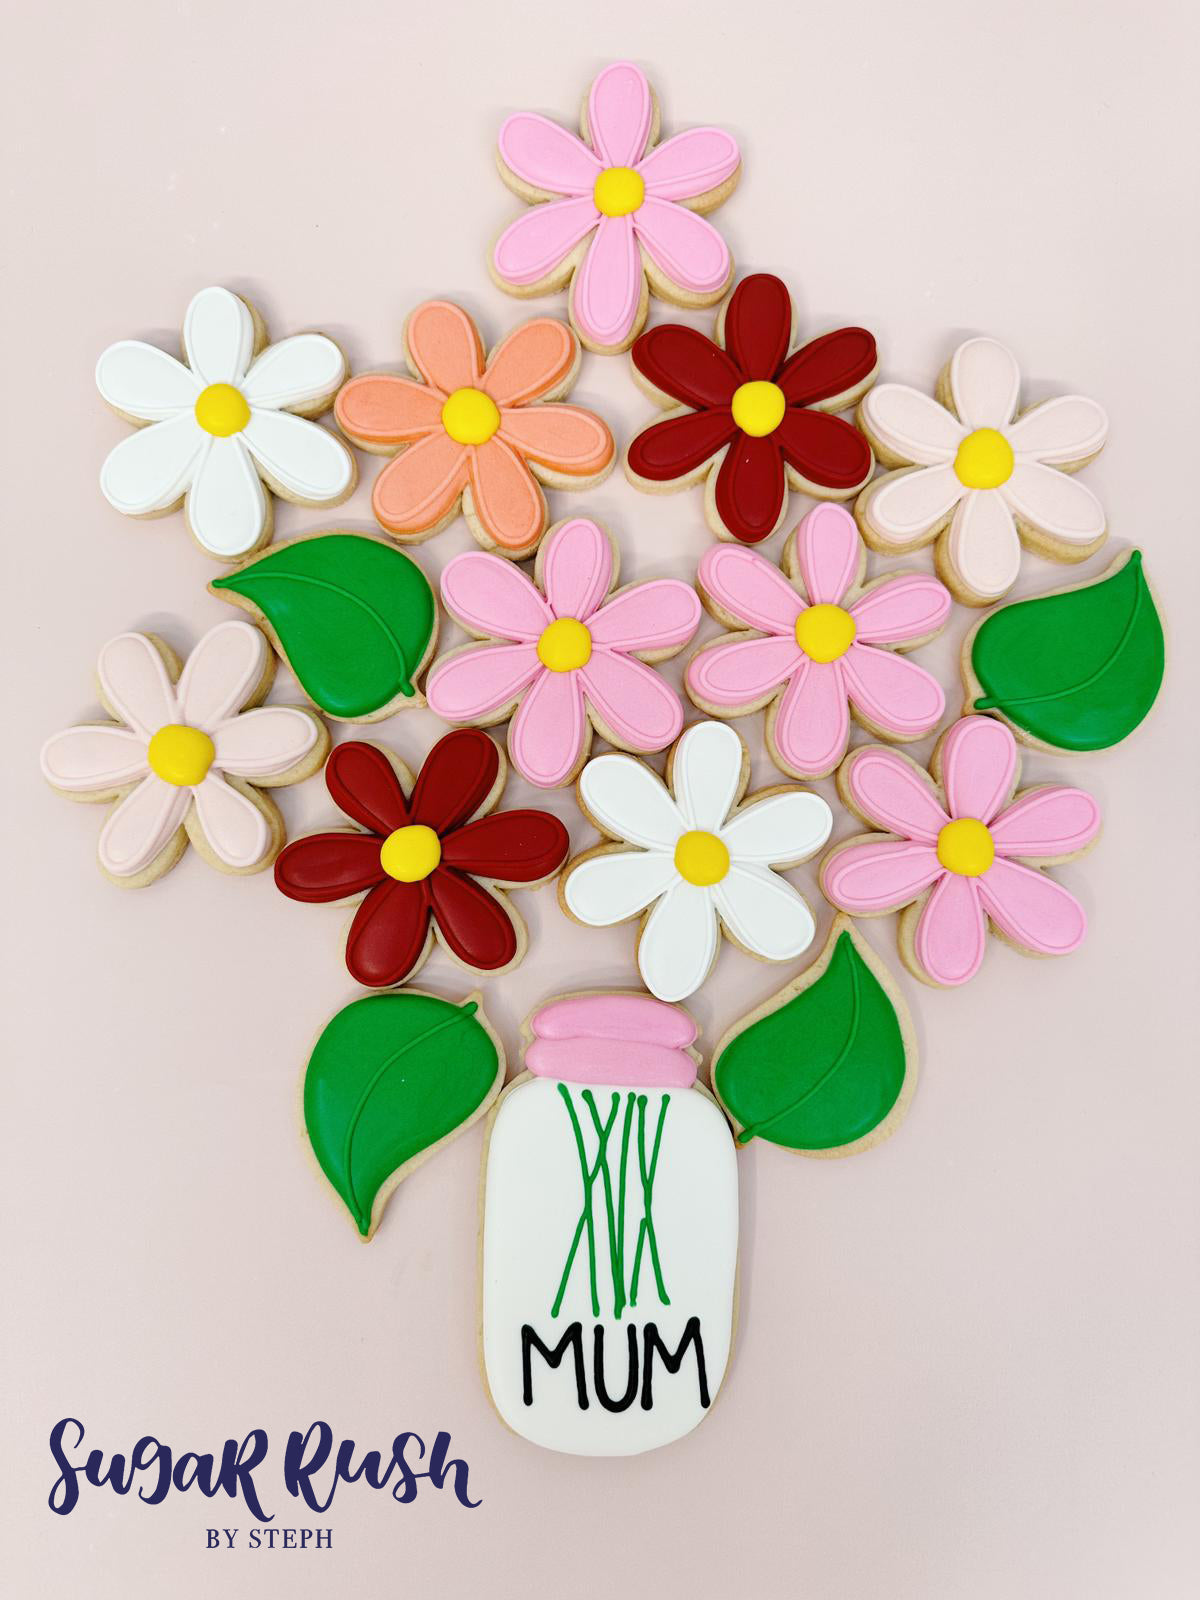 How to Leverage Digital Marketing for Mother's Day | StackAdapt